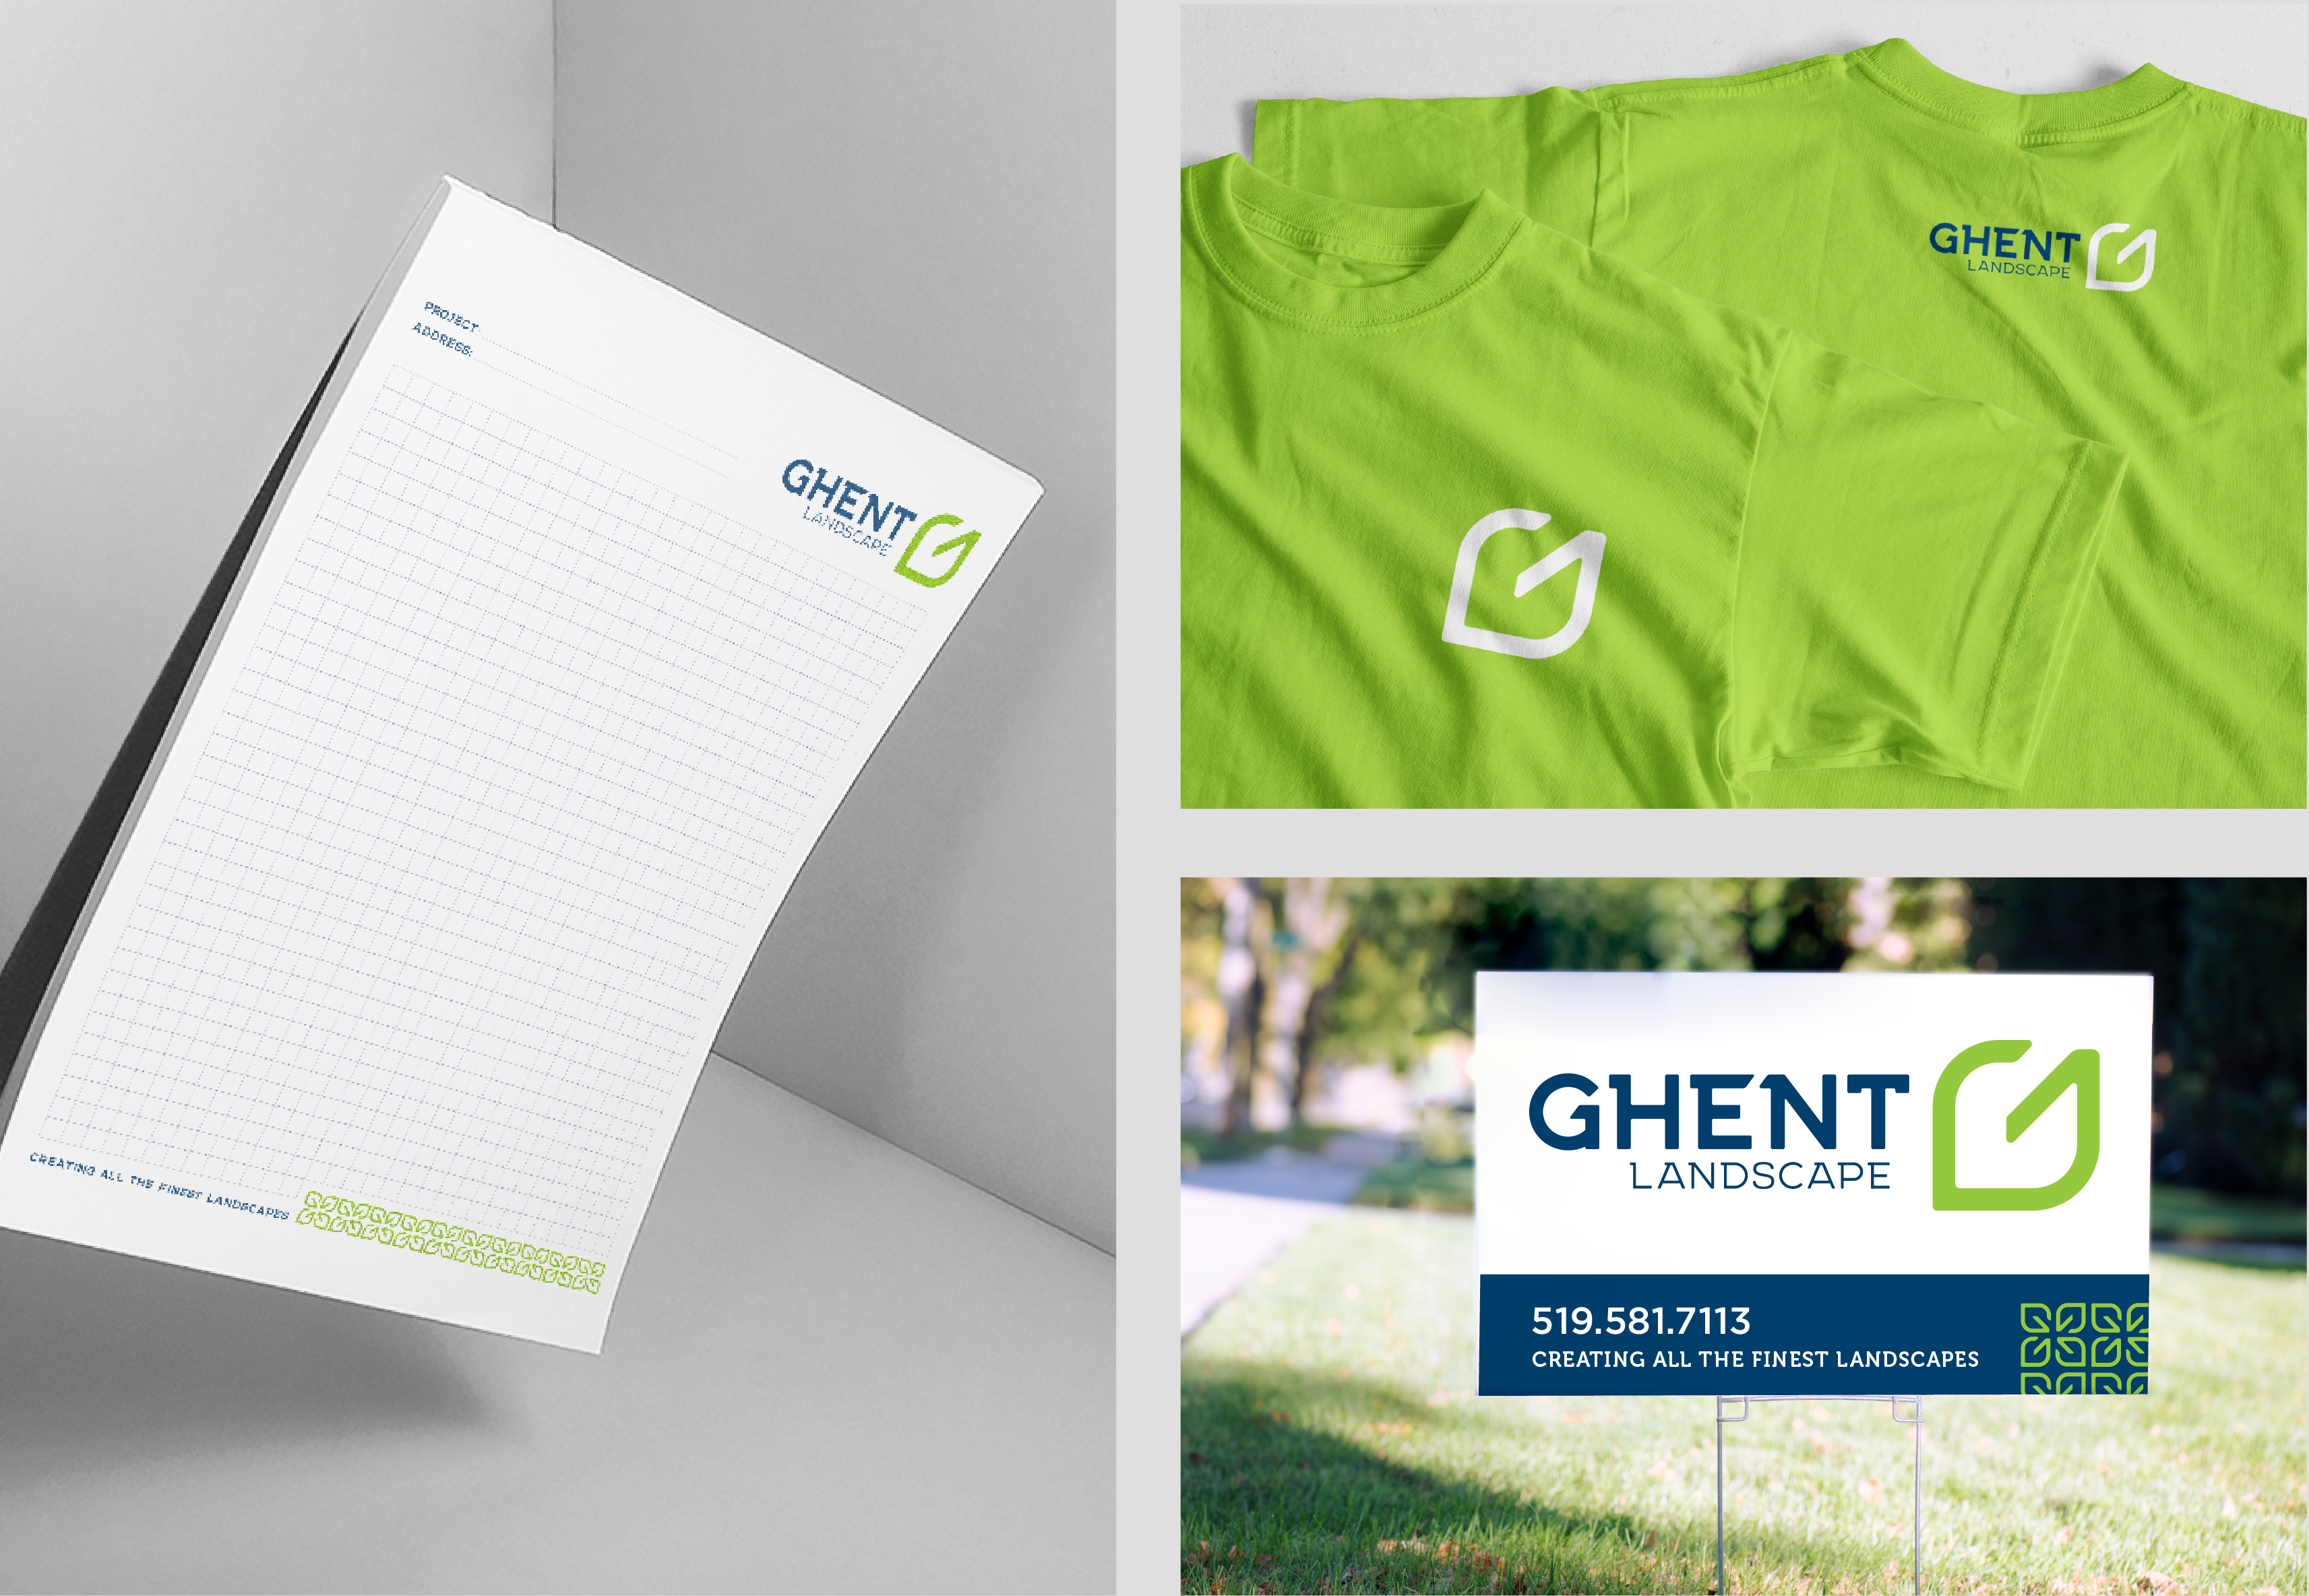 Branded graph paper, t-shirts and lawn sign